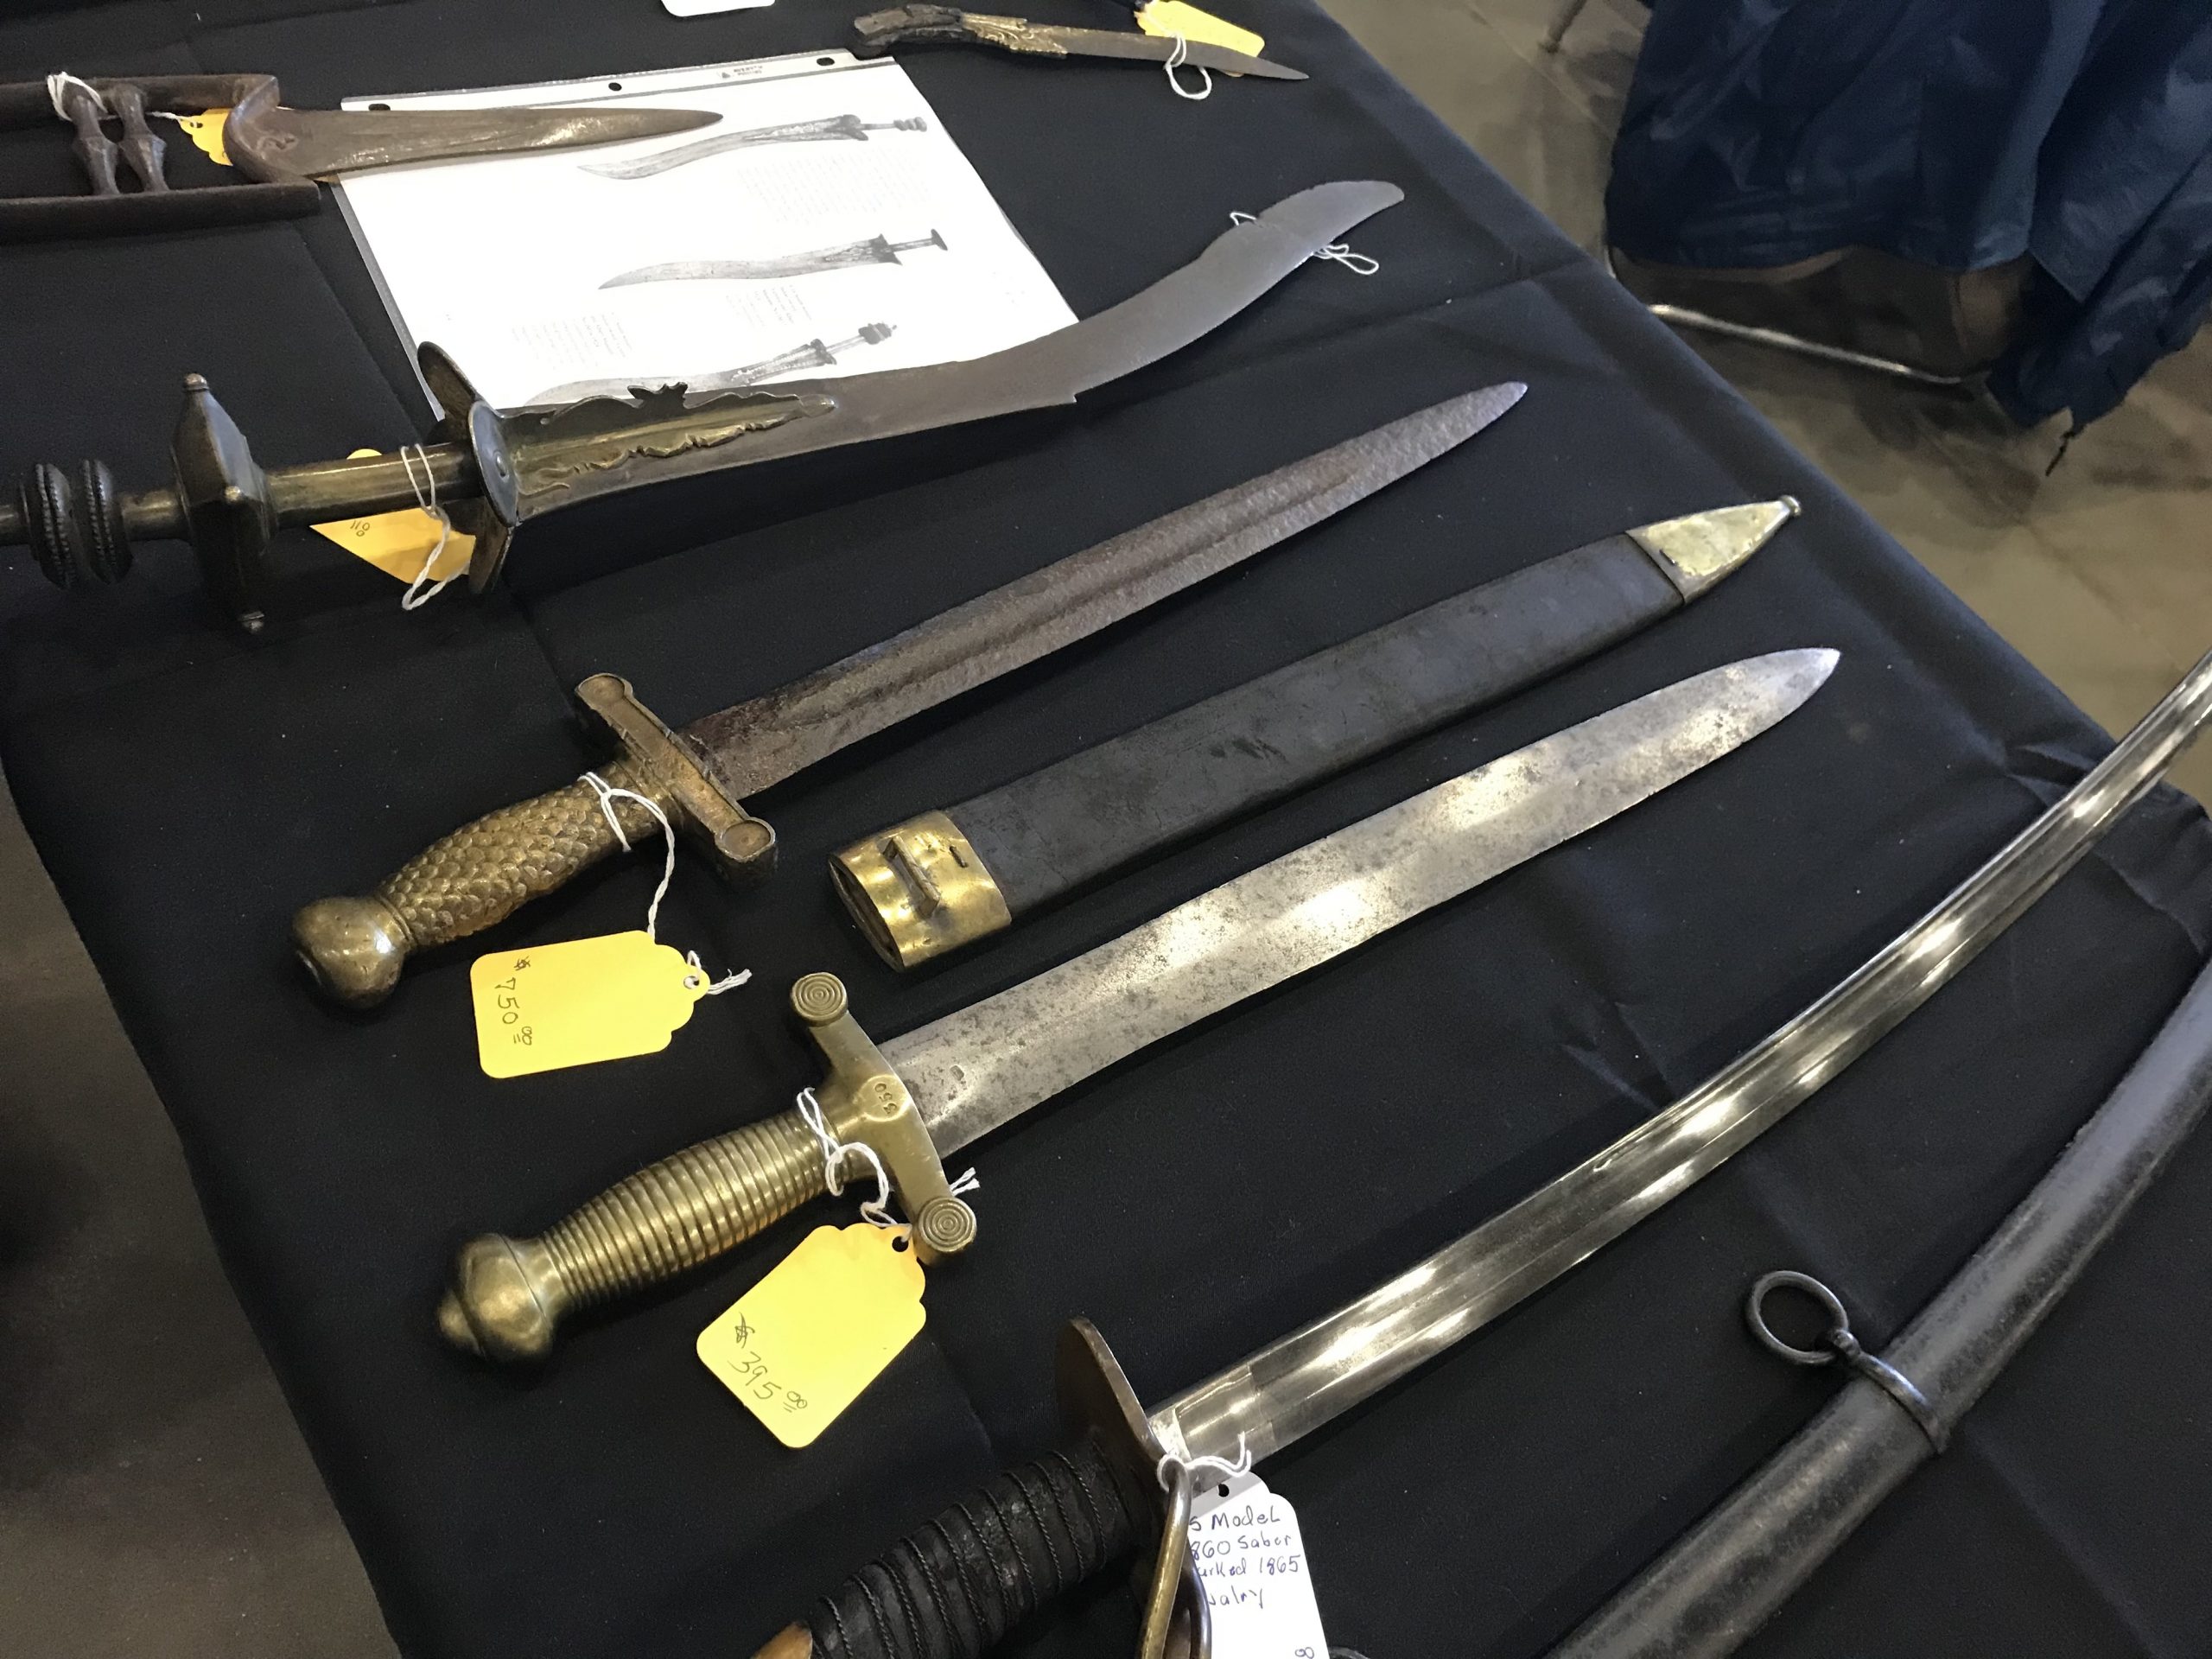 The French gladaiator pattern short swords and their American copies seem much older than 19th century.